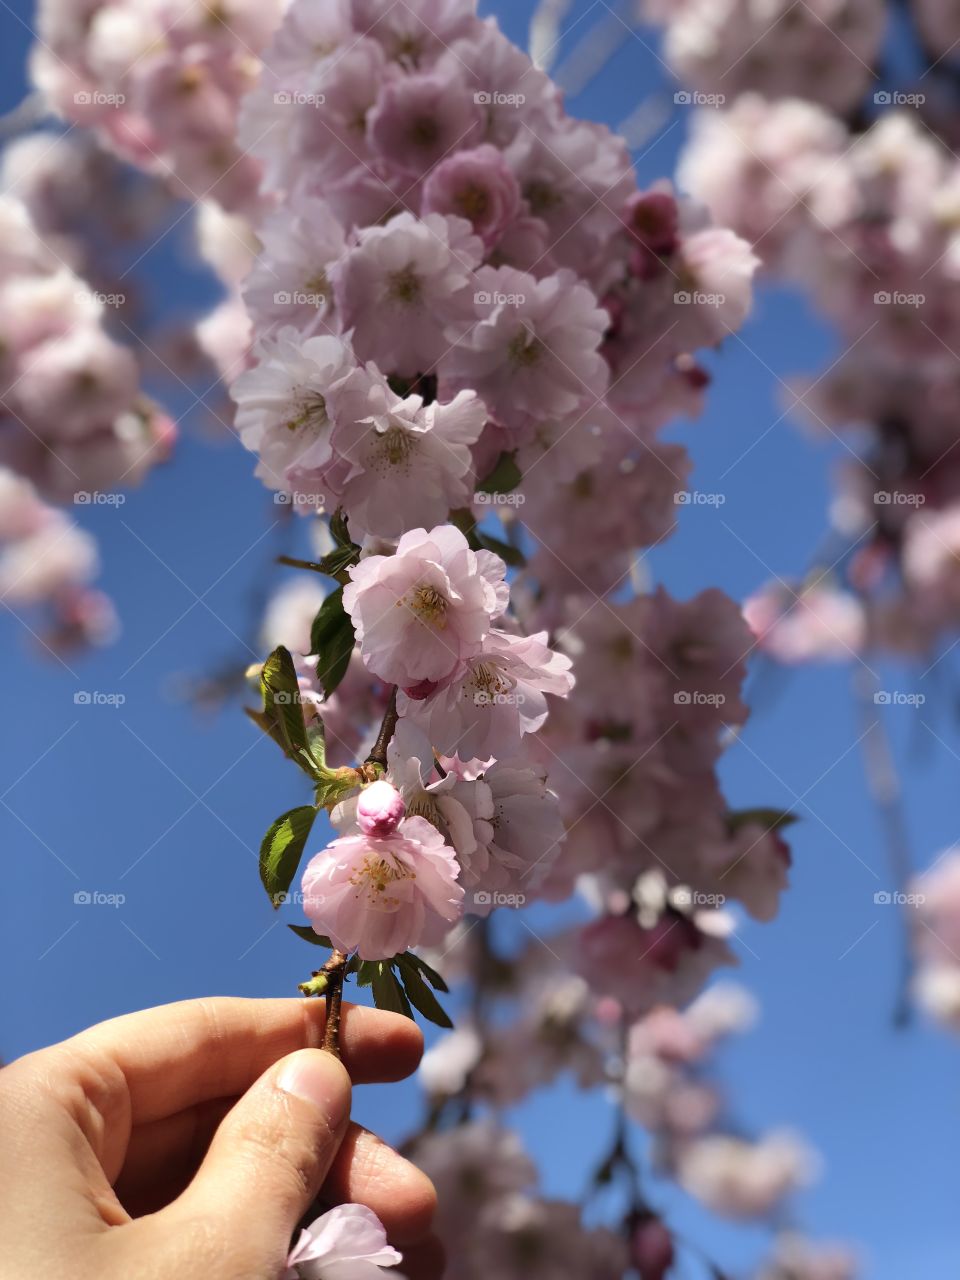 Touching cherryblossoms